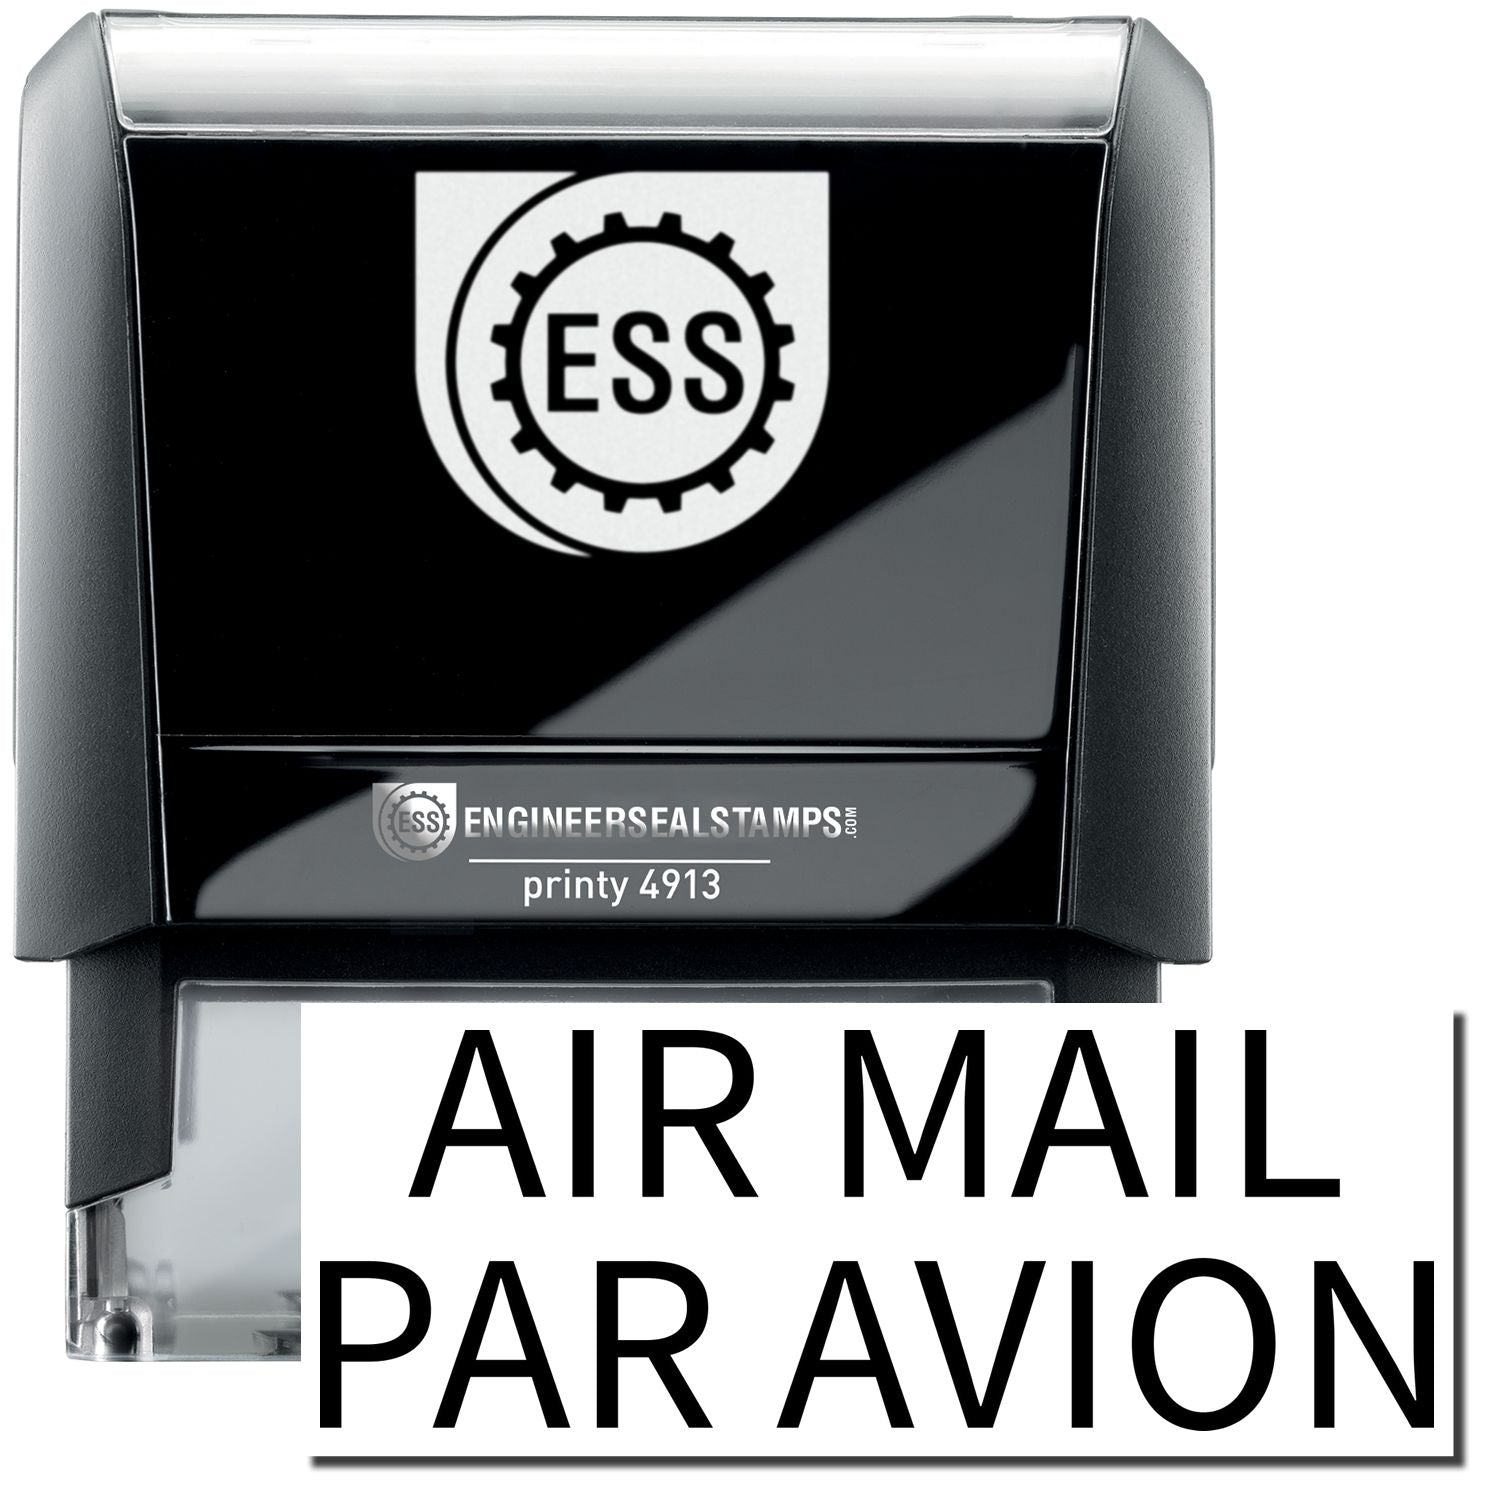 A self-inking stamp with a stamped image showing how the text "AIR MAIL PAR AVION" in a large font is displayed by it after stamping.